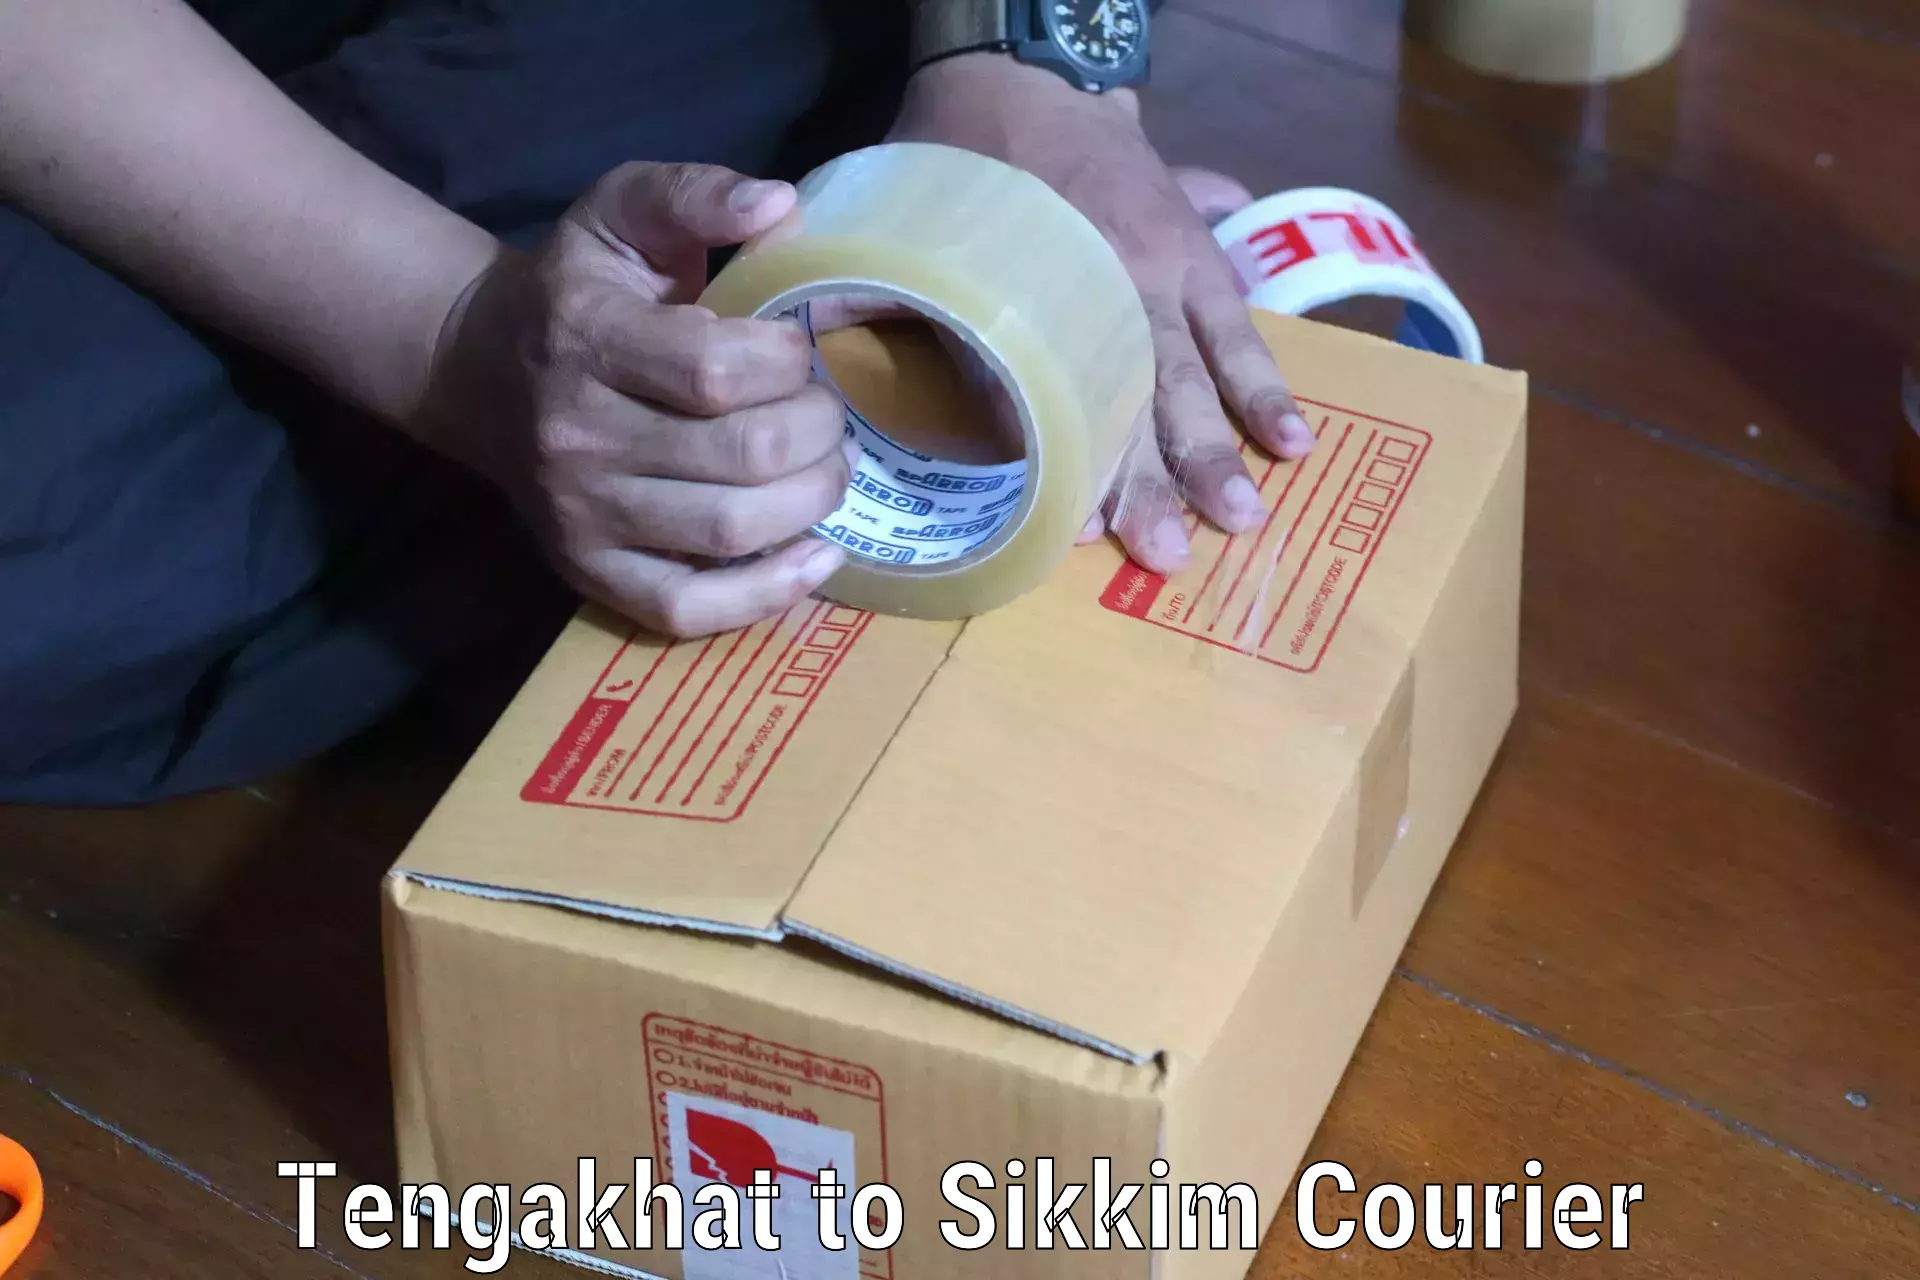 Supply chain efficiency Tengakhat to East Sikkim